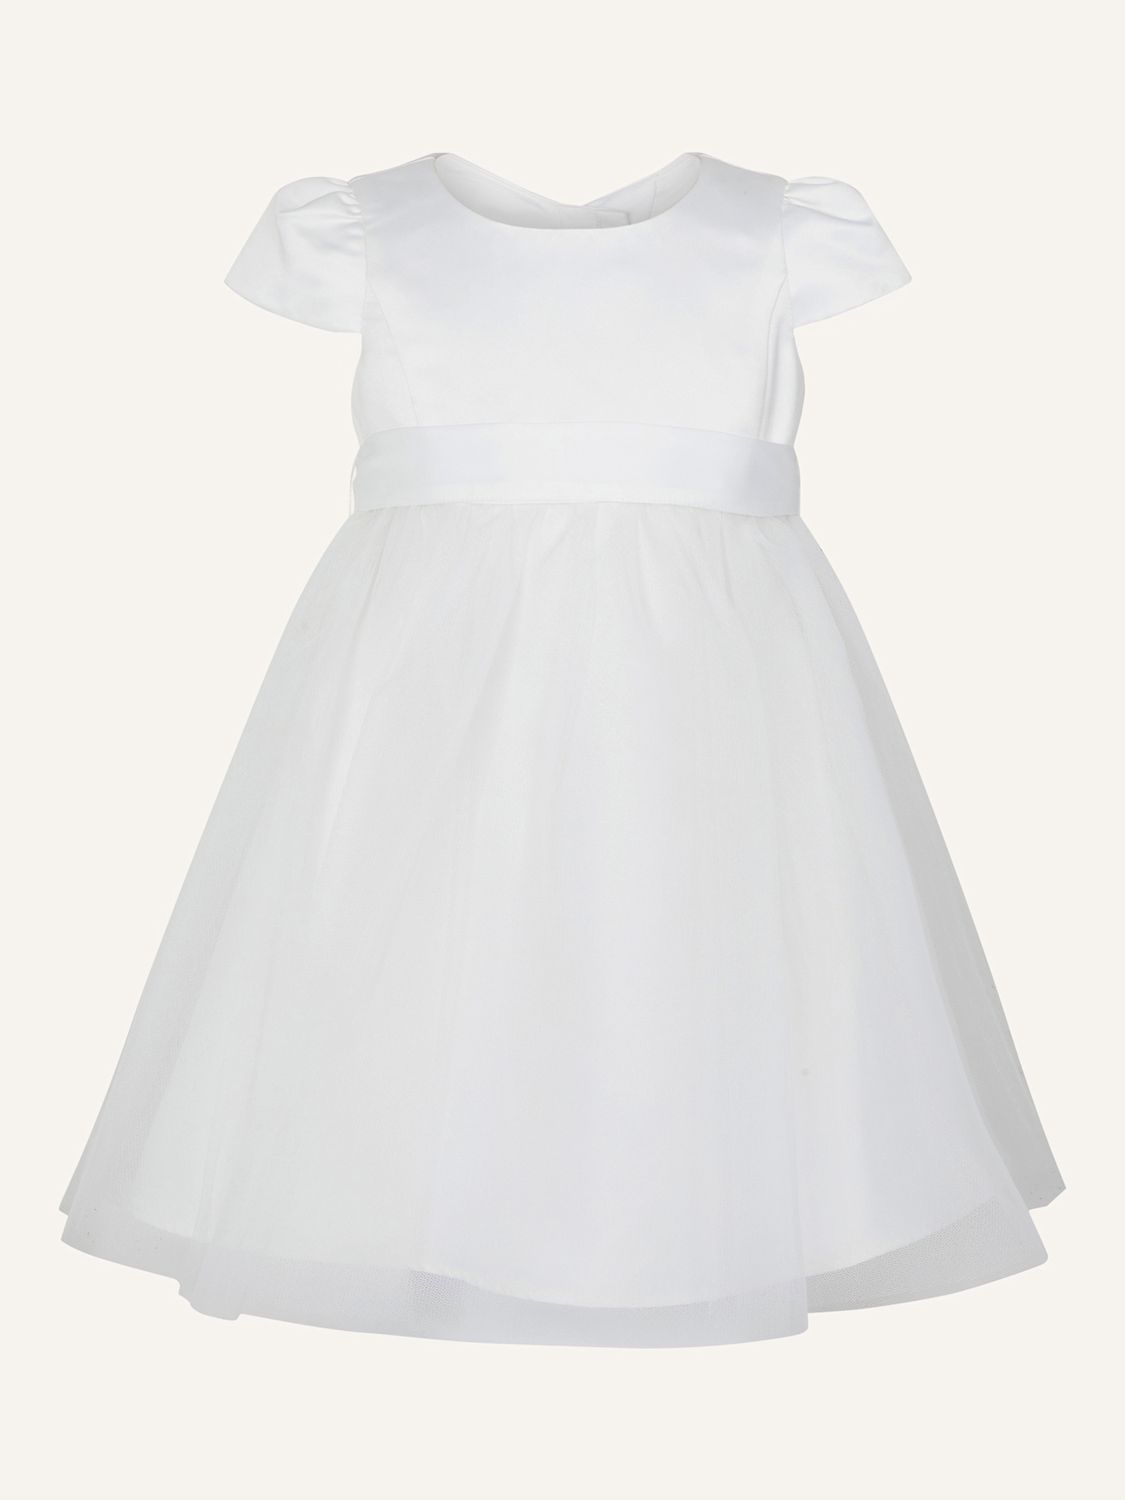 Monsoon Baby Sew Tulle Bridesmaids Dress, Ivory, 0-3 months